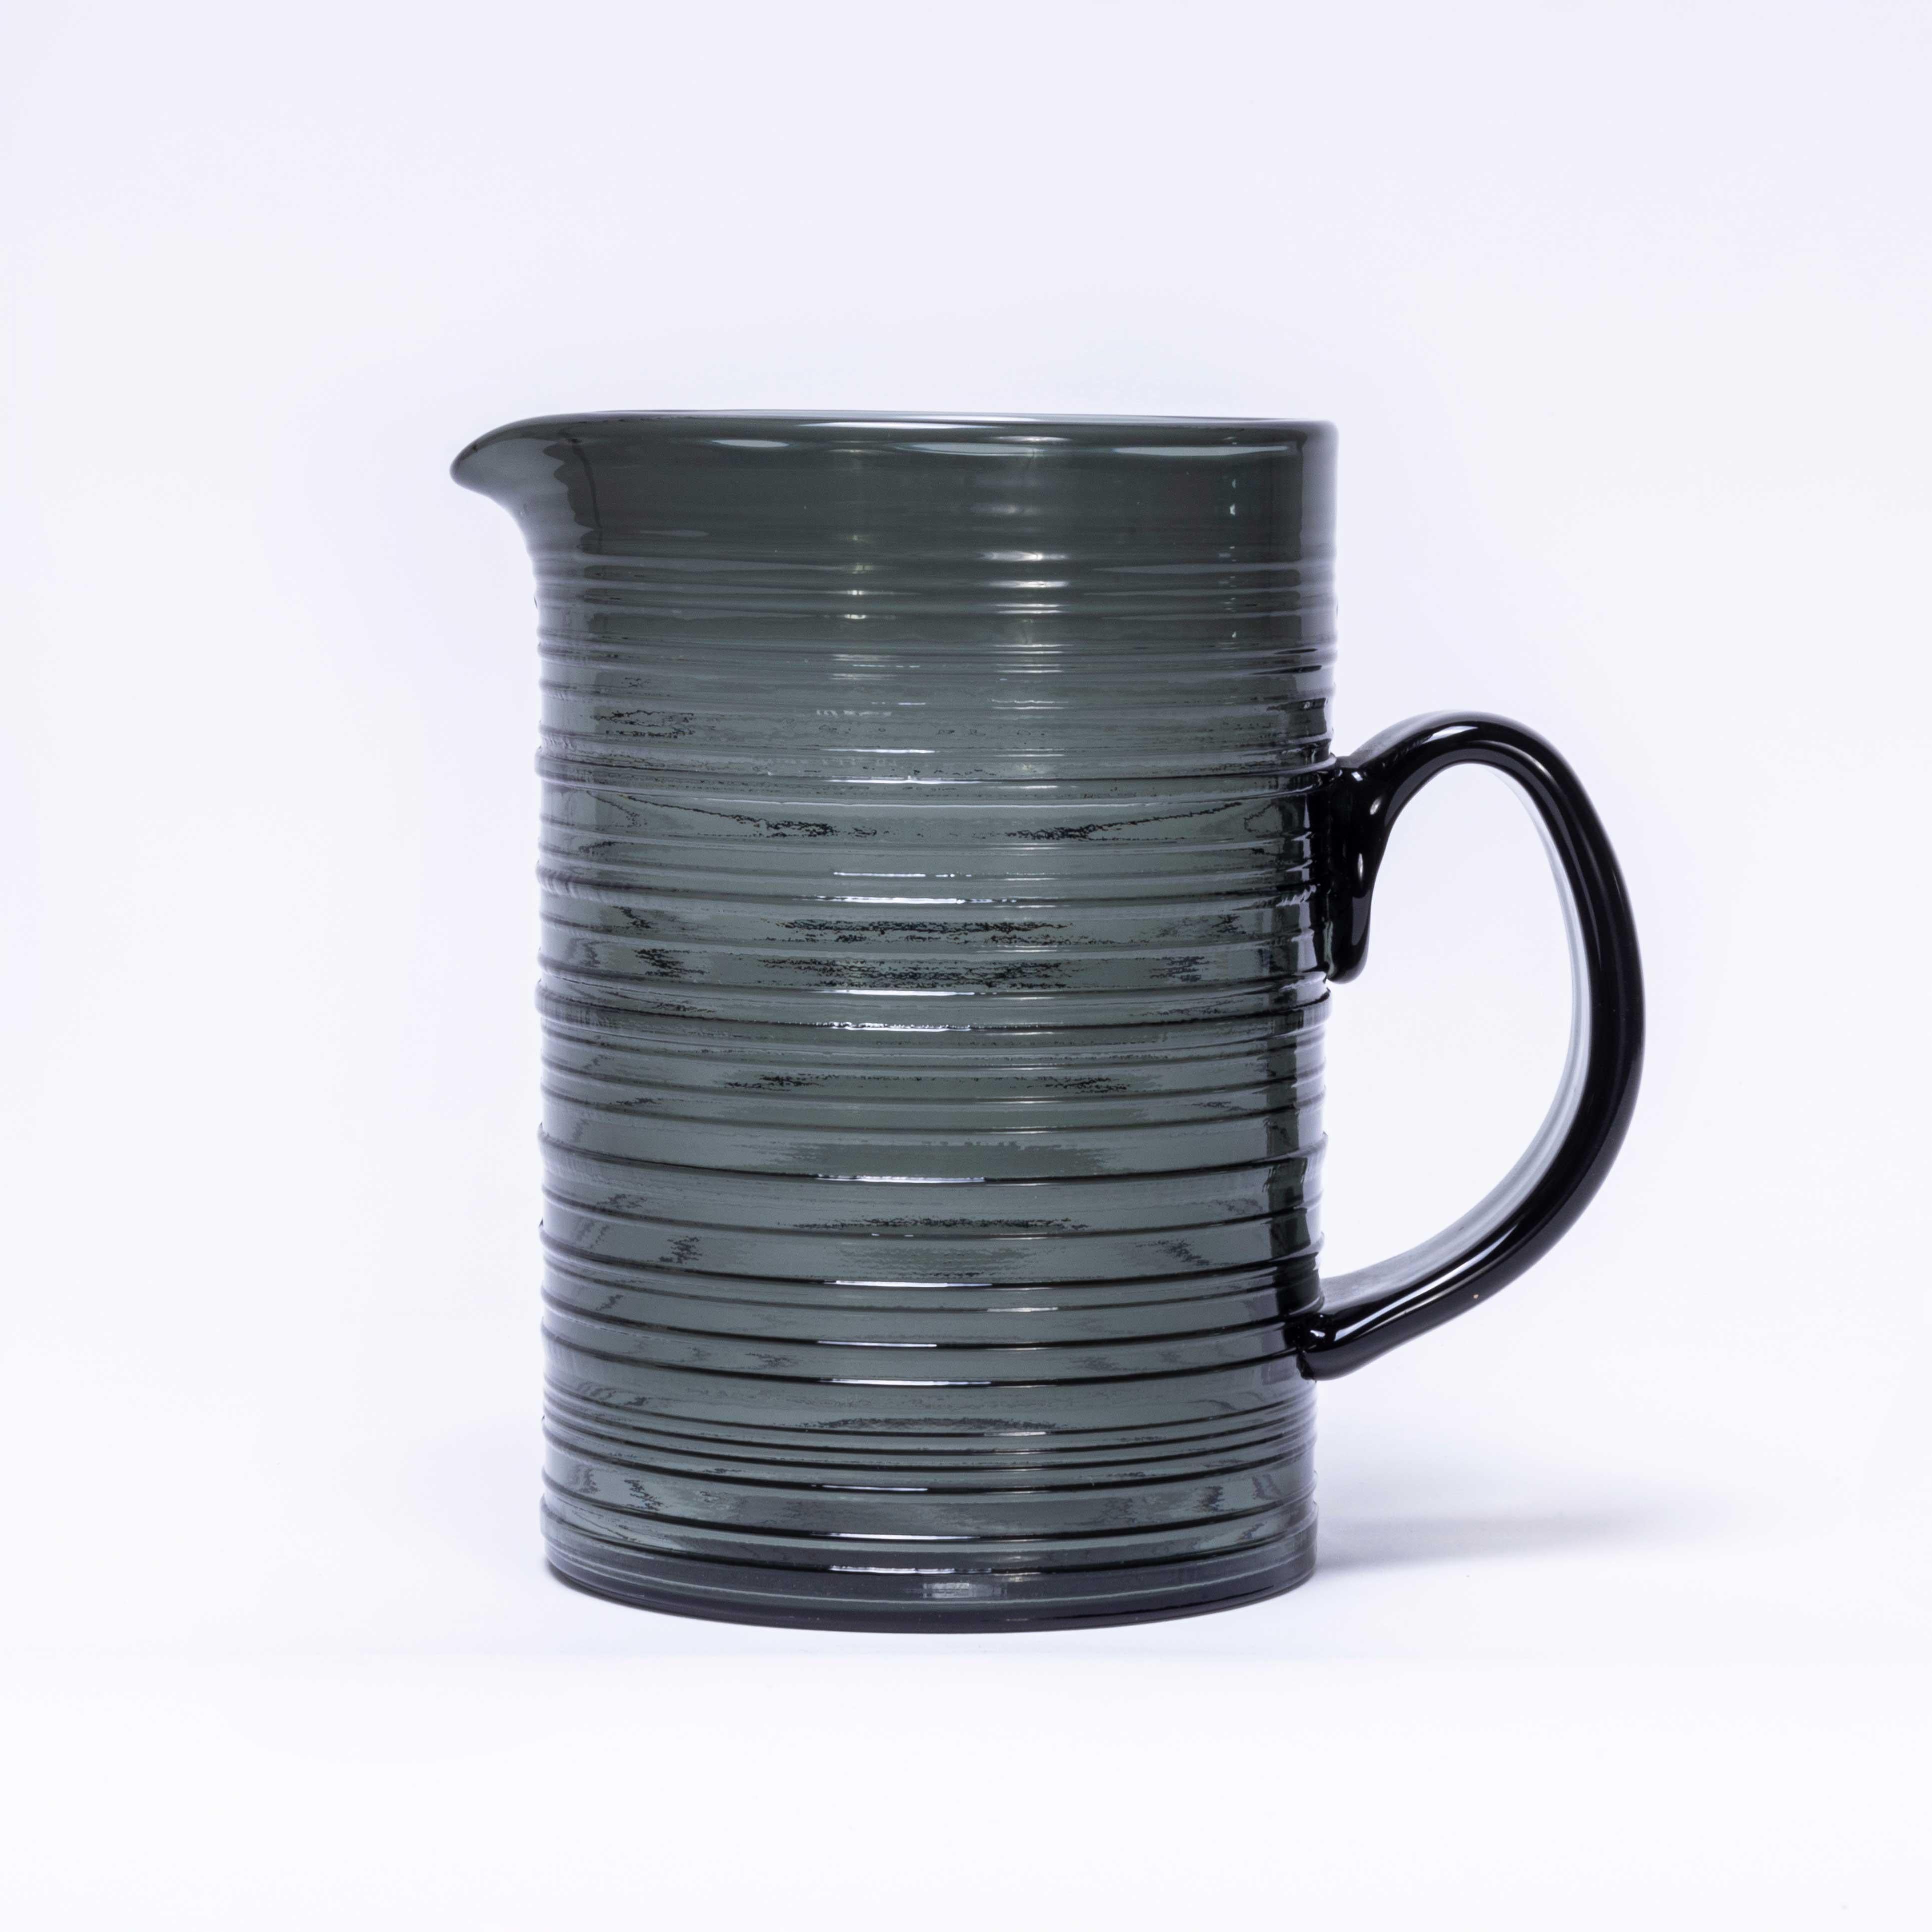 1960’s Kaj Franck Nuutajarvi Rustica pitcher – mouth blown
1960’s Kaj Franck Nuutajarvi Rustica Pitcher. Designed by Kaj Franck, executed by Nuutajärvi Notsjö in Finland. In very good condition.

Workshop report
Our workshop team inspect every